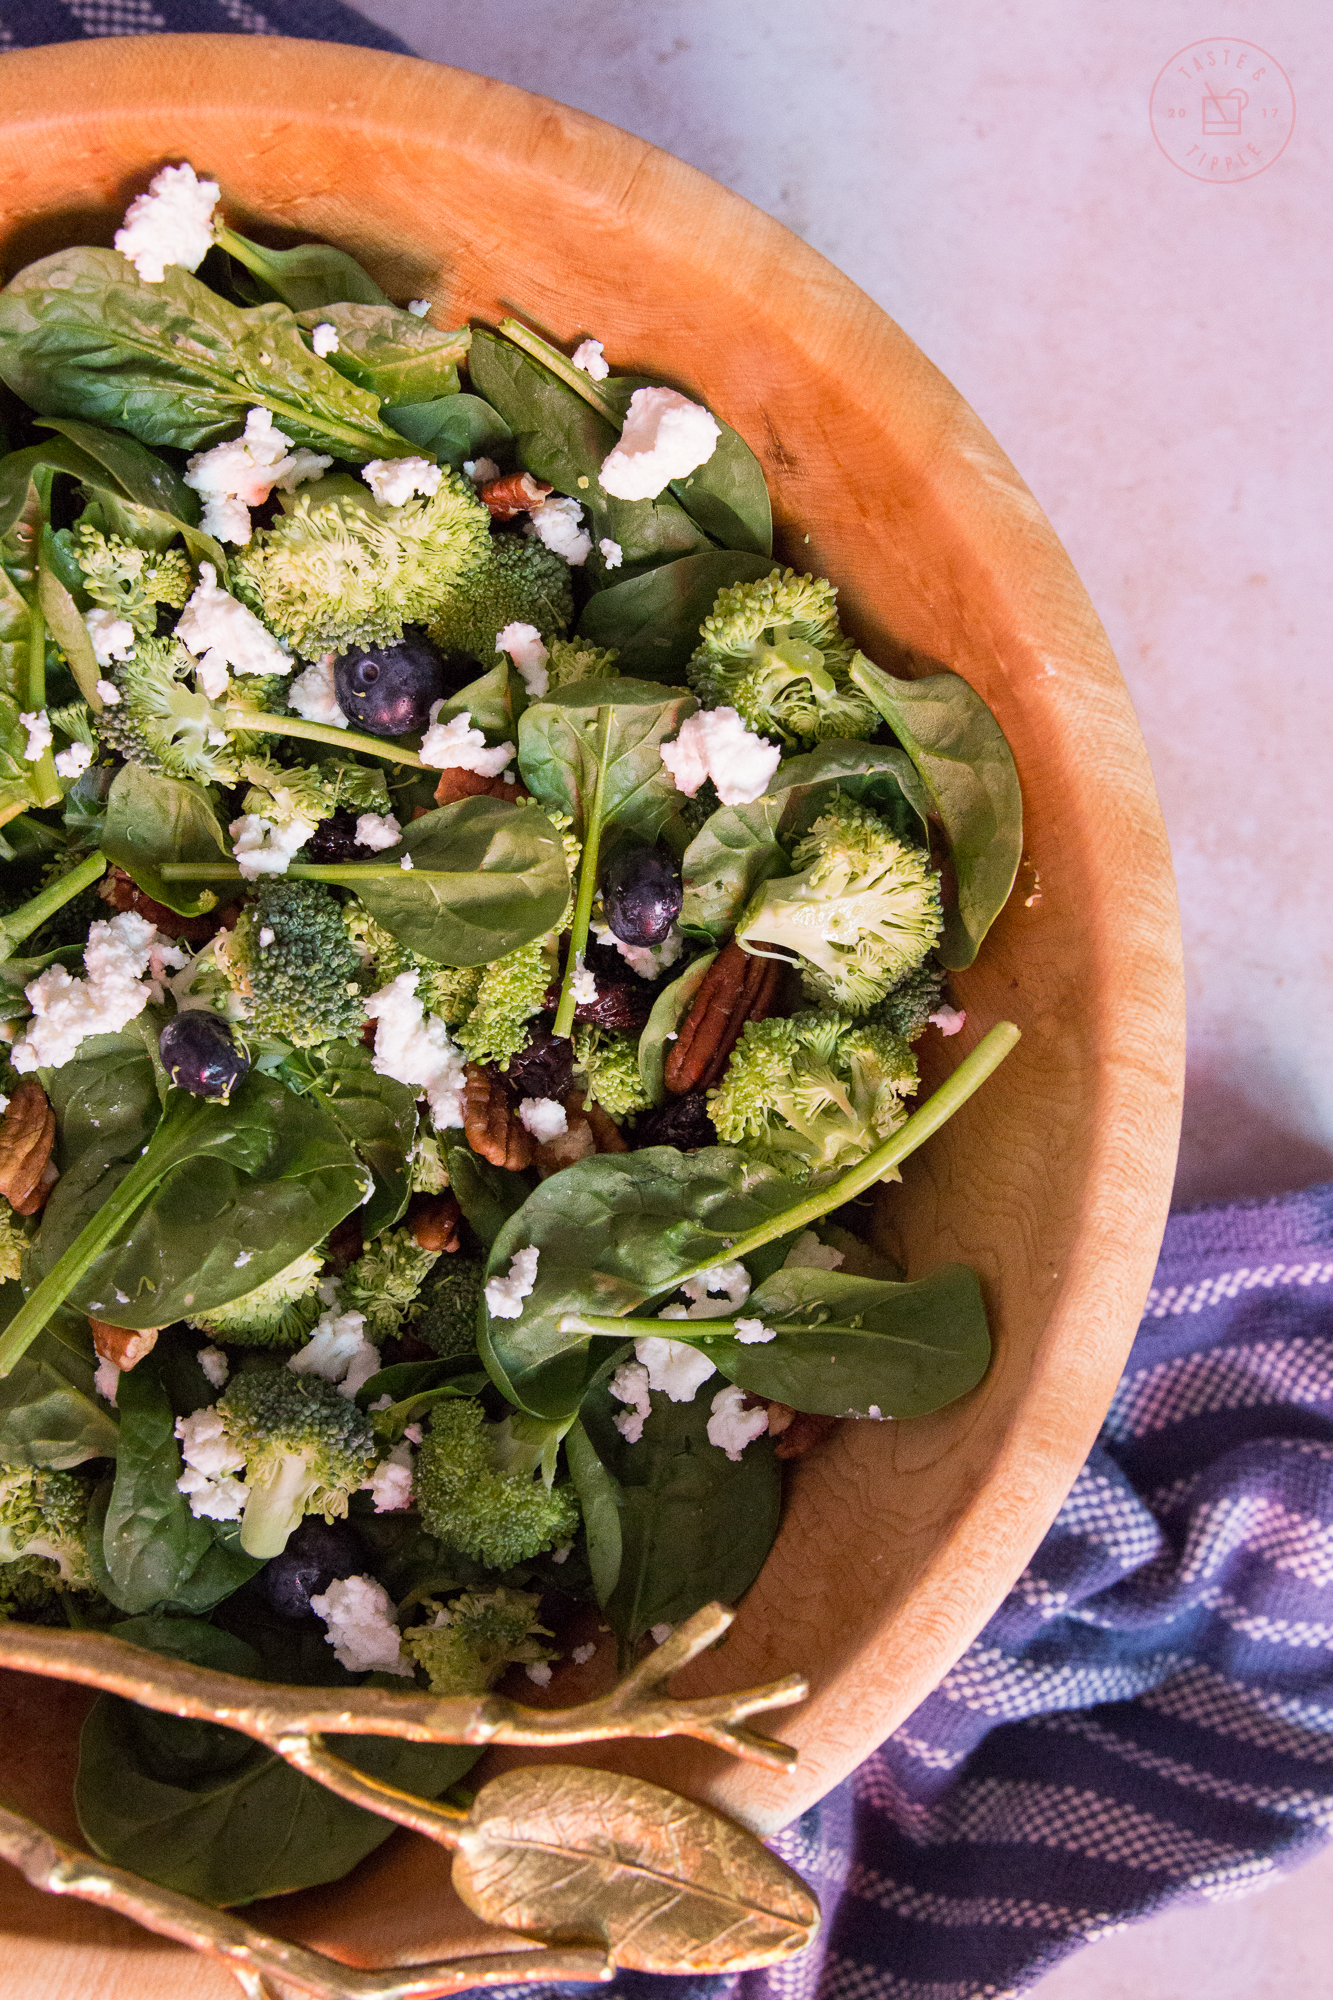 Blueberry Broccoli Salad with Ranch Dressing | Taste and Tipple